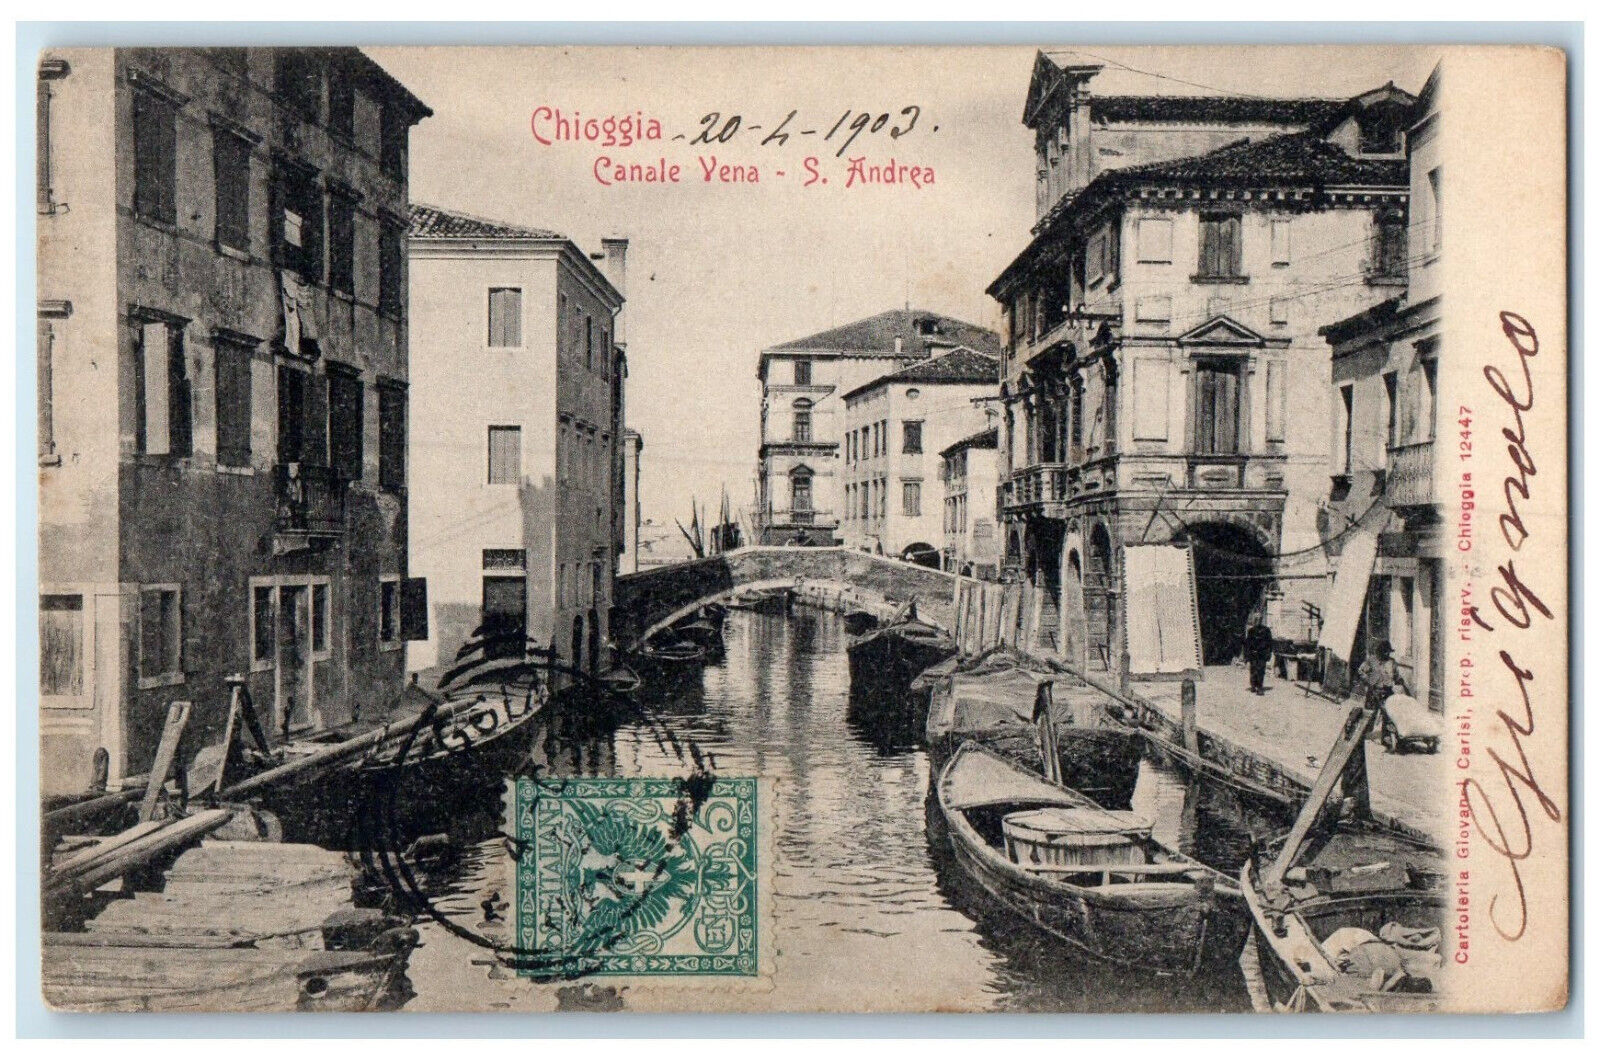 1903 Boat from Canale Vena - S. Andrea Chioggia Italy Antique Posted Postcard